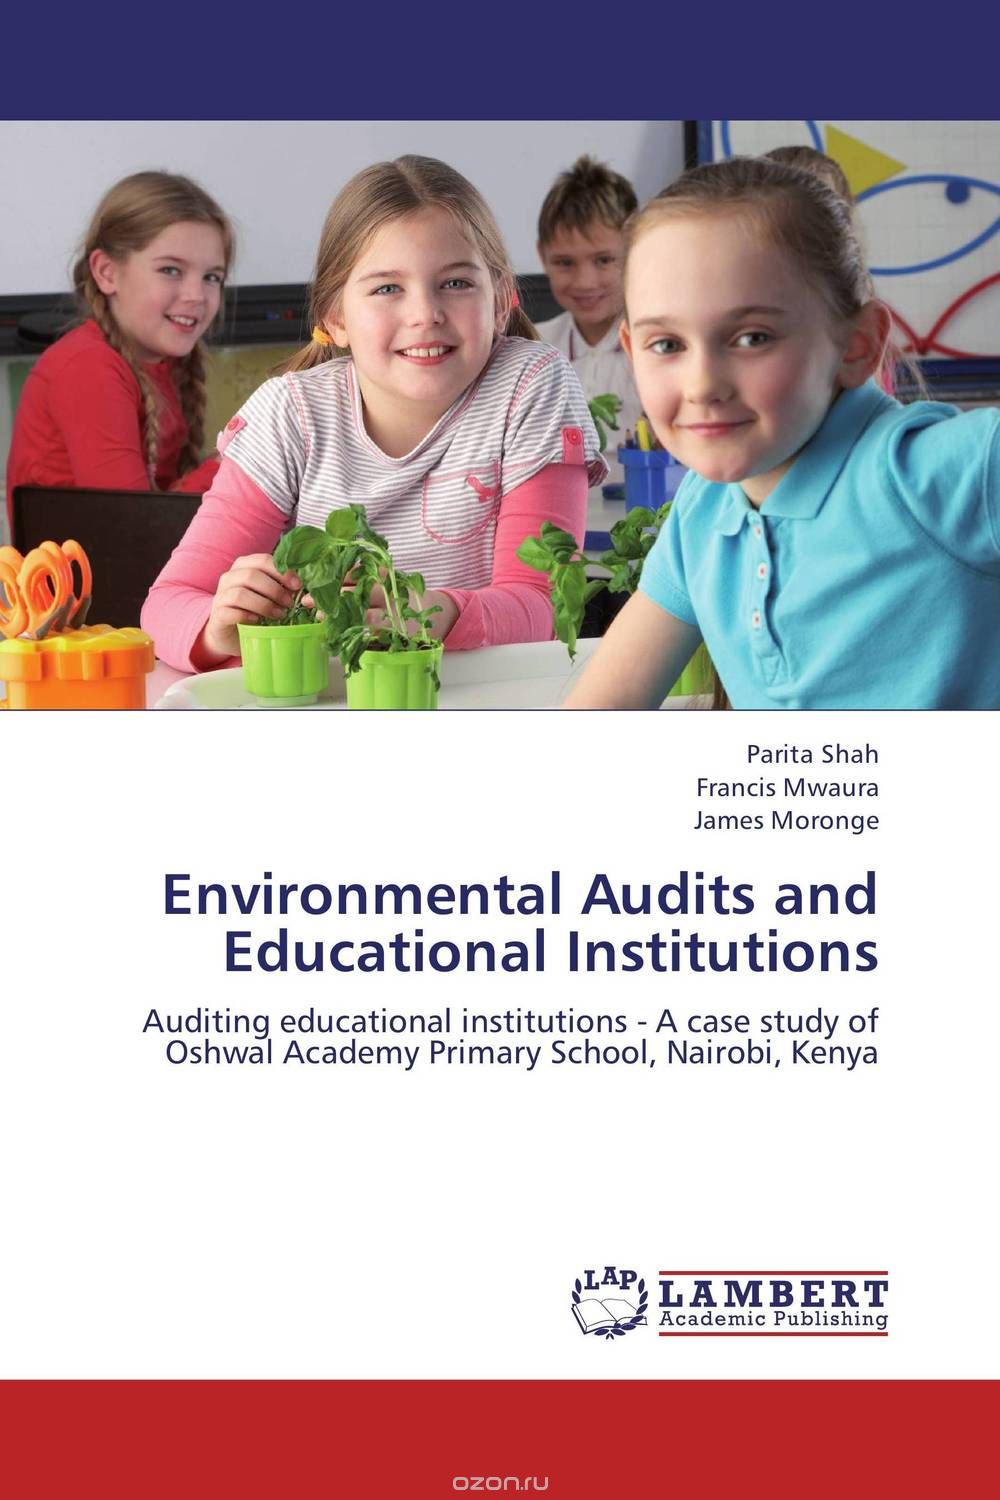 Environmental Audits and Educational Institutions